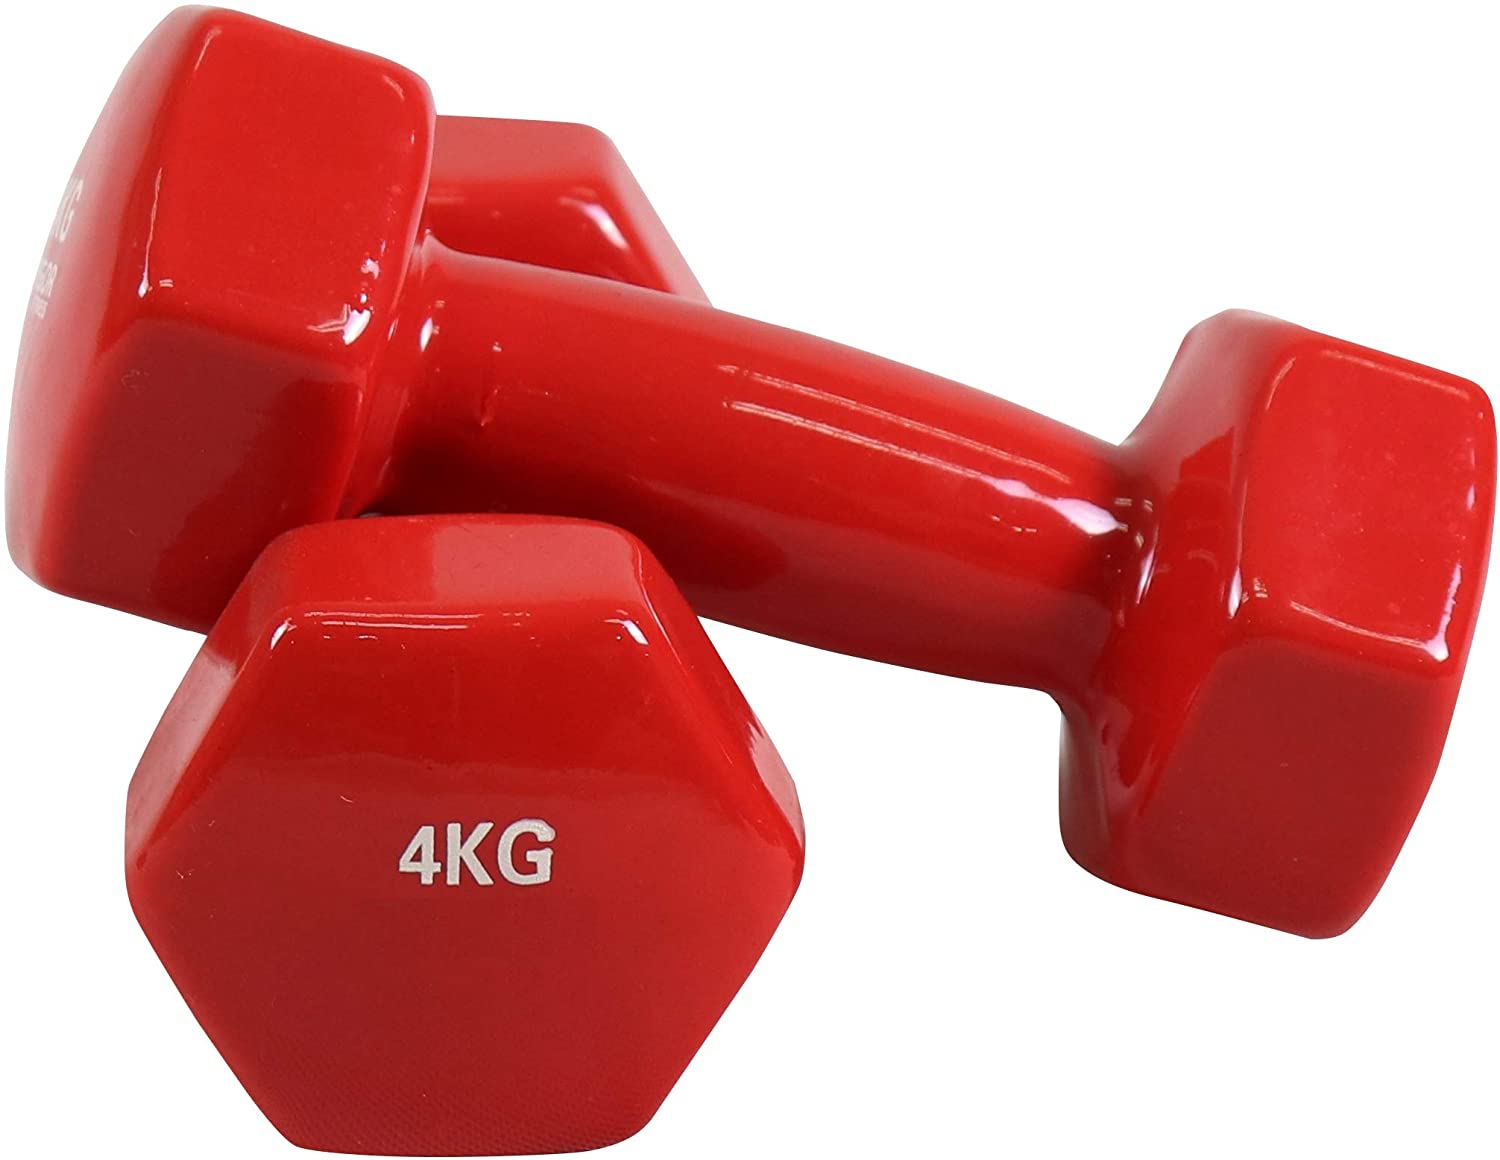 Dumbbell | High Quality Ladies Dumbbell | Yoga Training Dumbbell | Weight - 4KG | Red | Purple | Single Unit